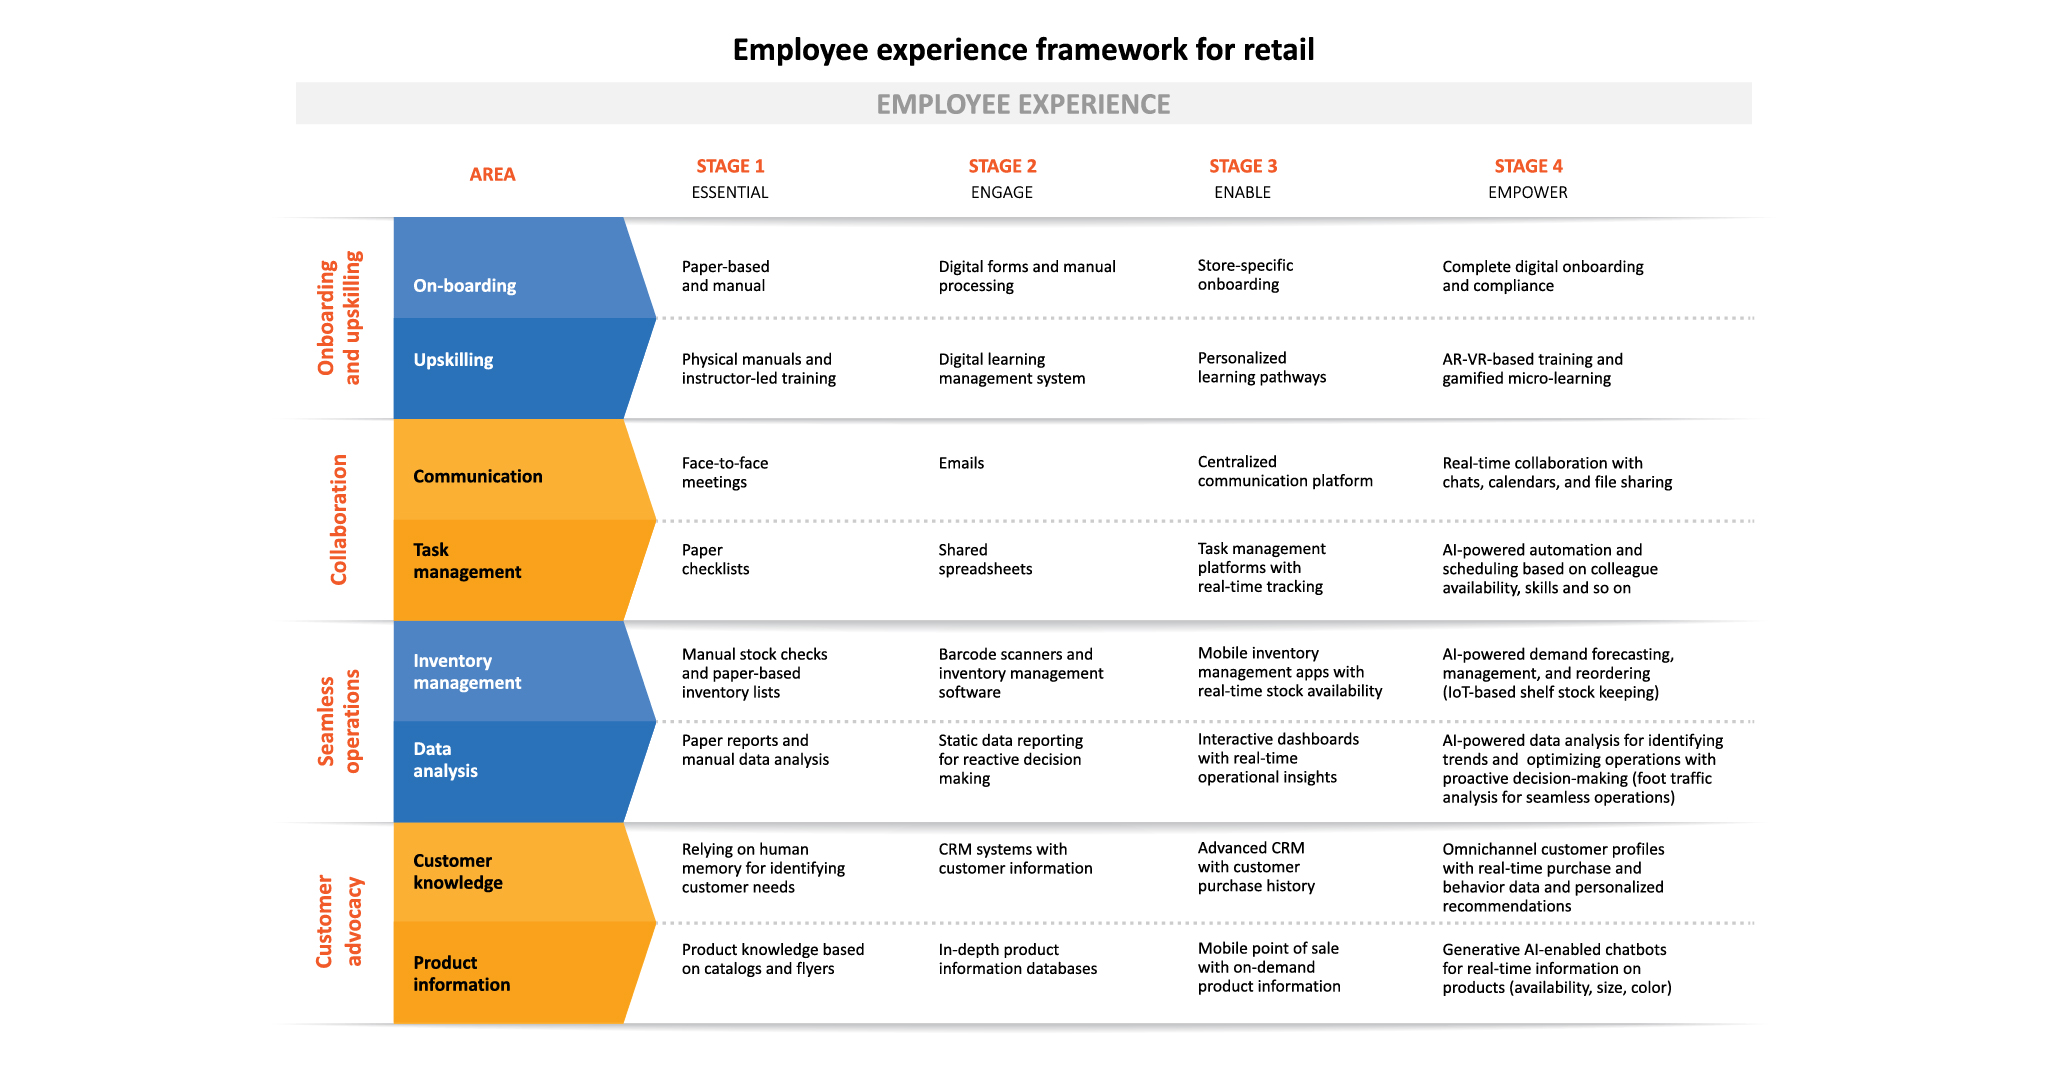 Framework to assess approach to employee experience